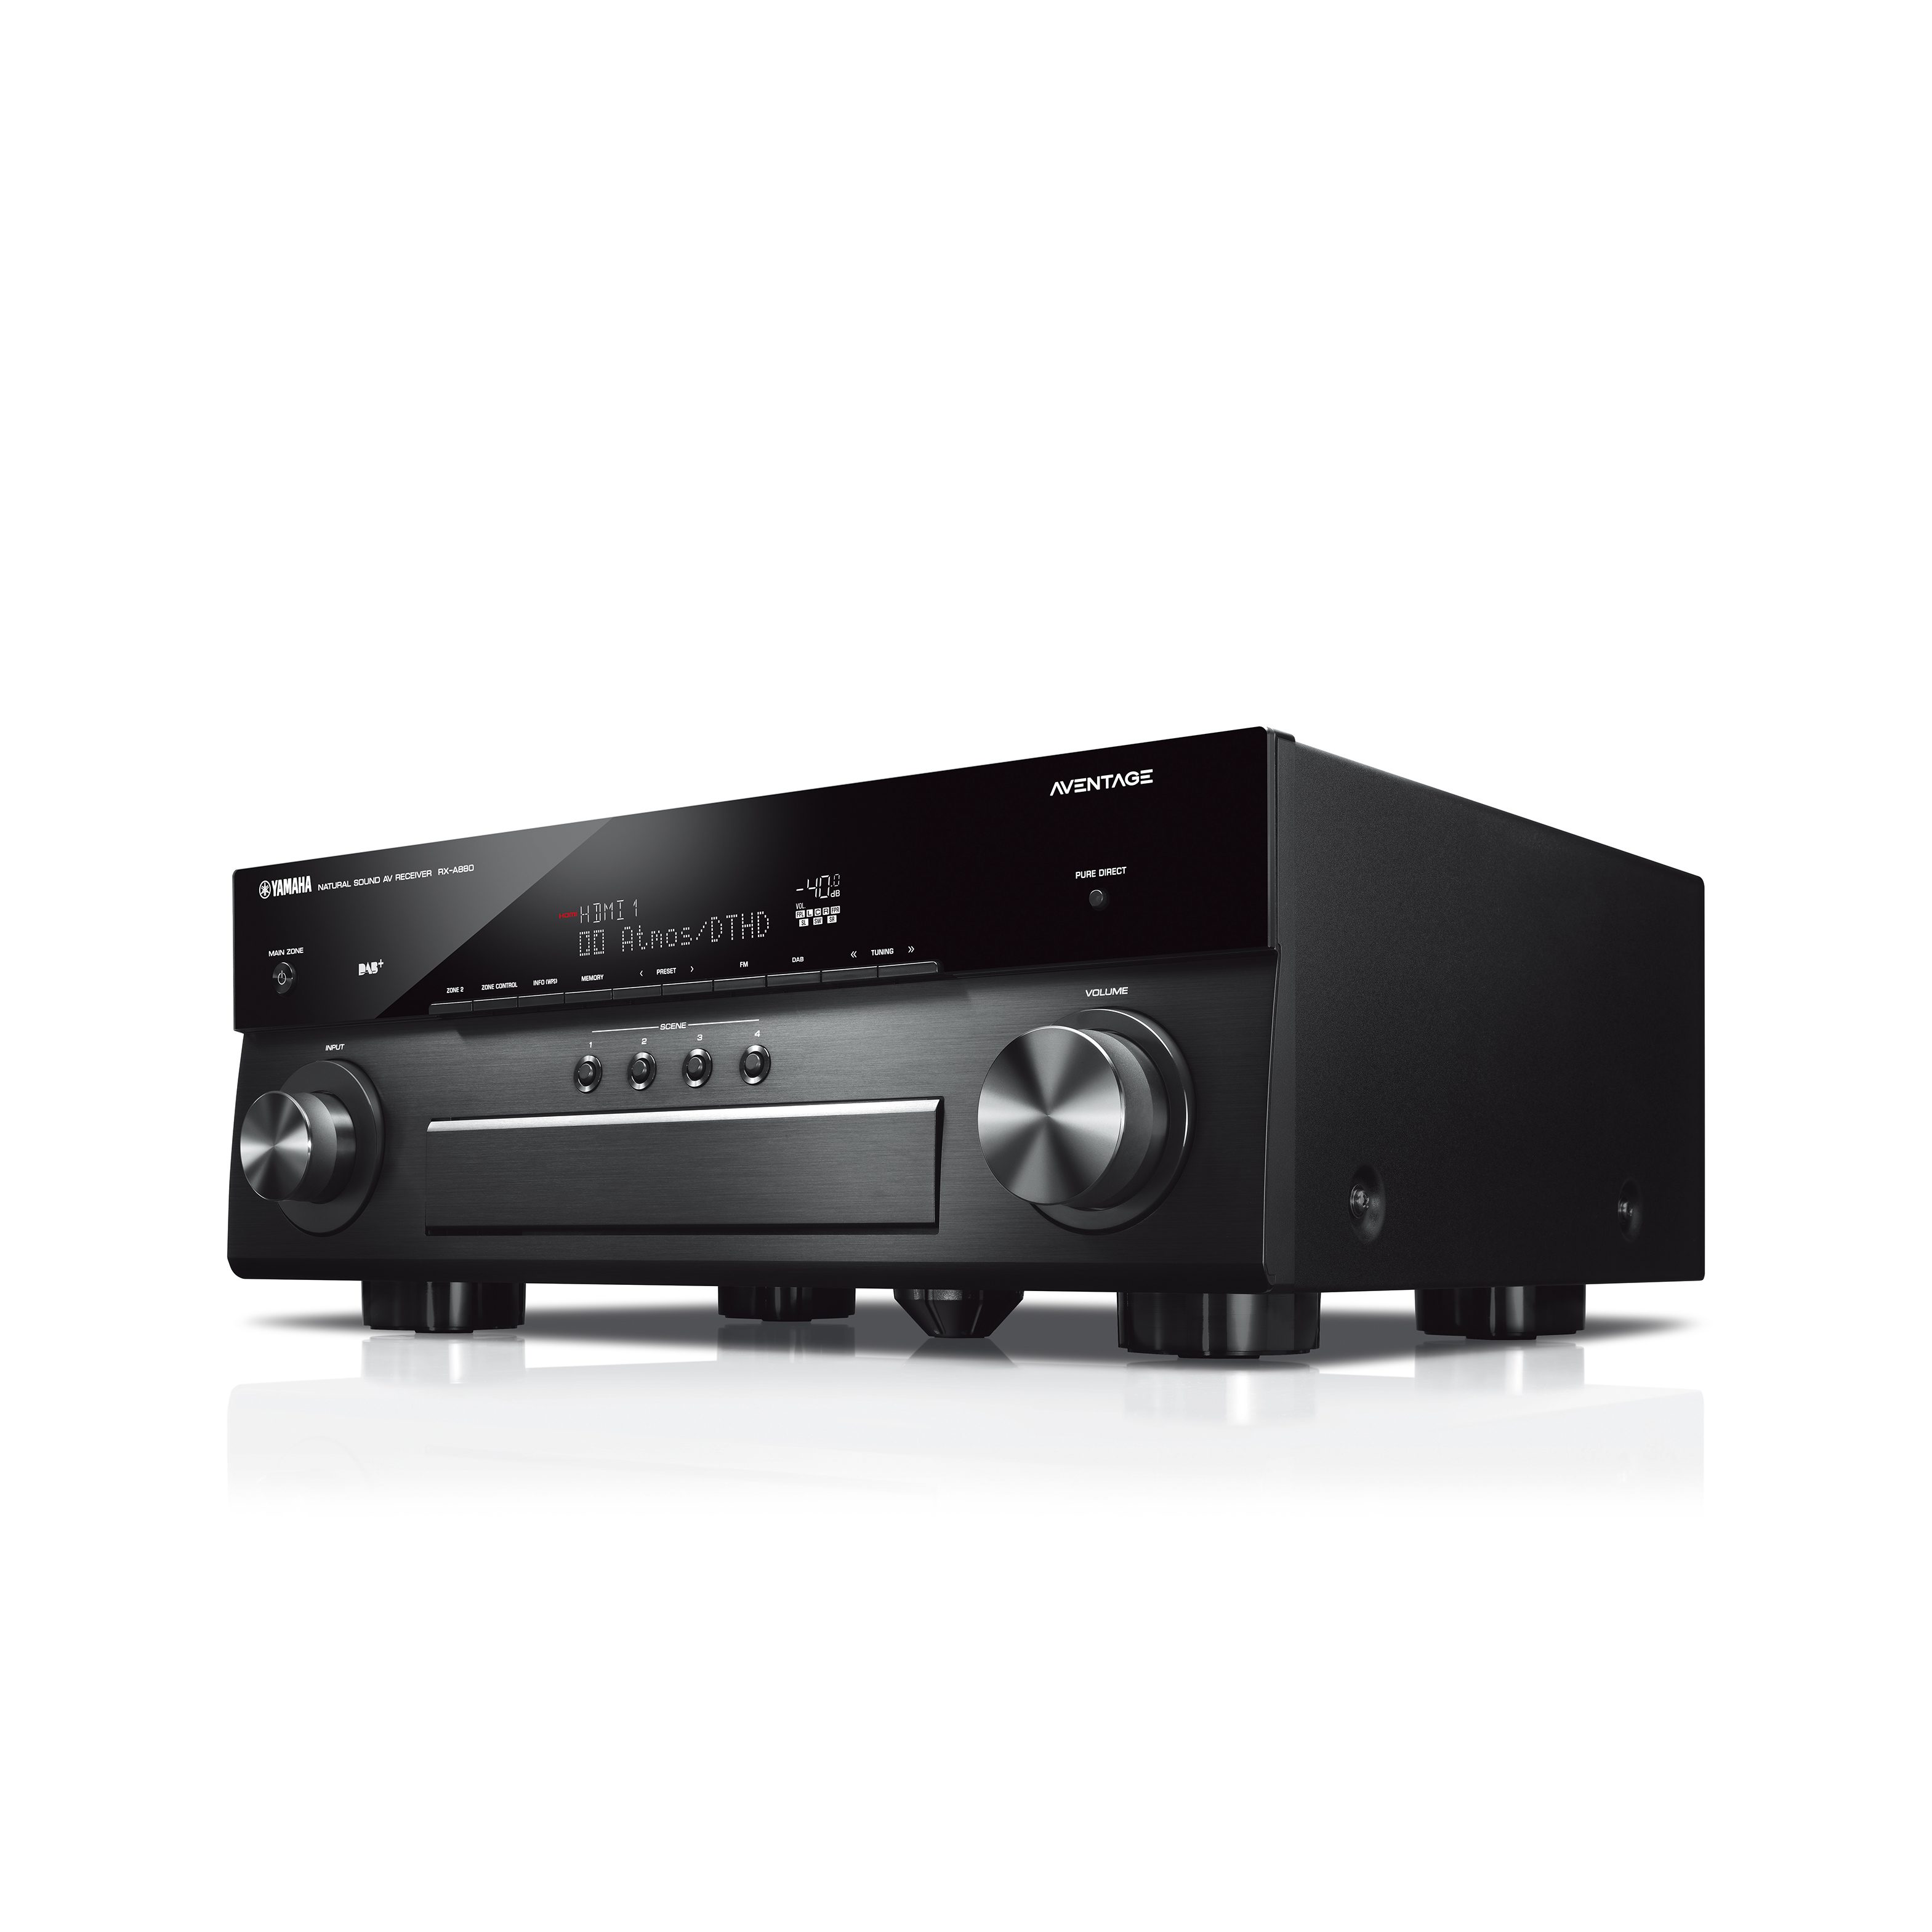 RX-A880 - Overview - AV Receivers - Audio & Visual - Products - Yamaha